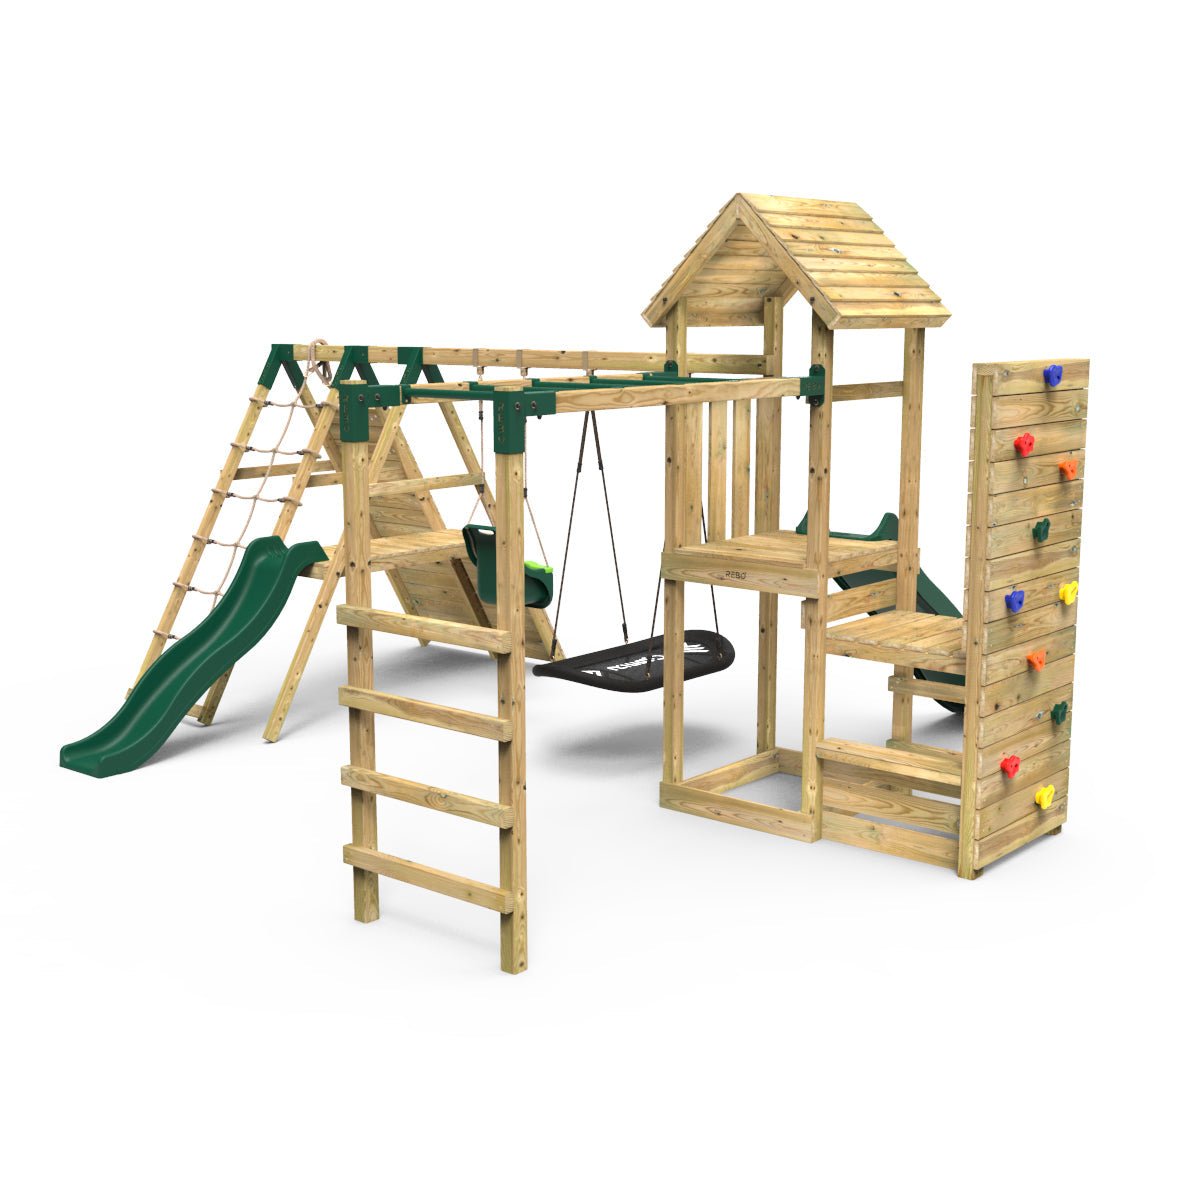 Rebo Wooden Climbing Frame with Vertical Rock Wall, Swing Set and Slides - Cairngorm+